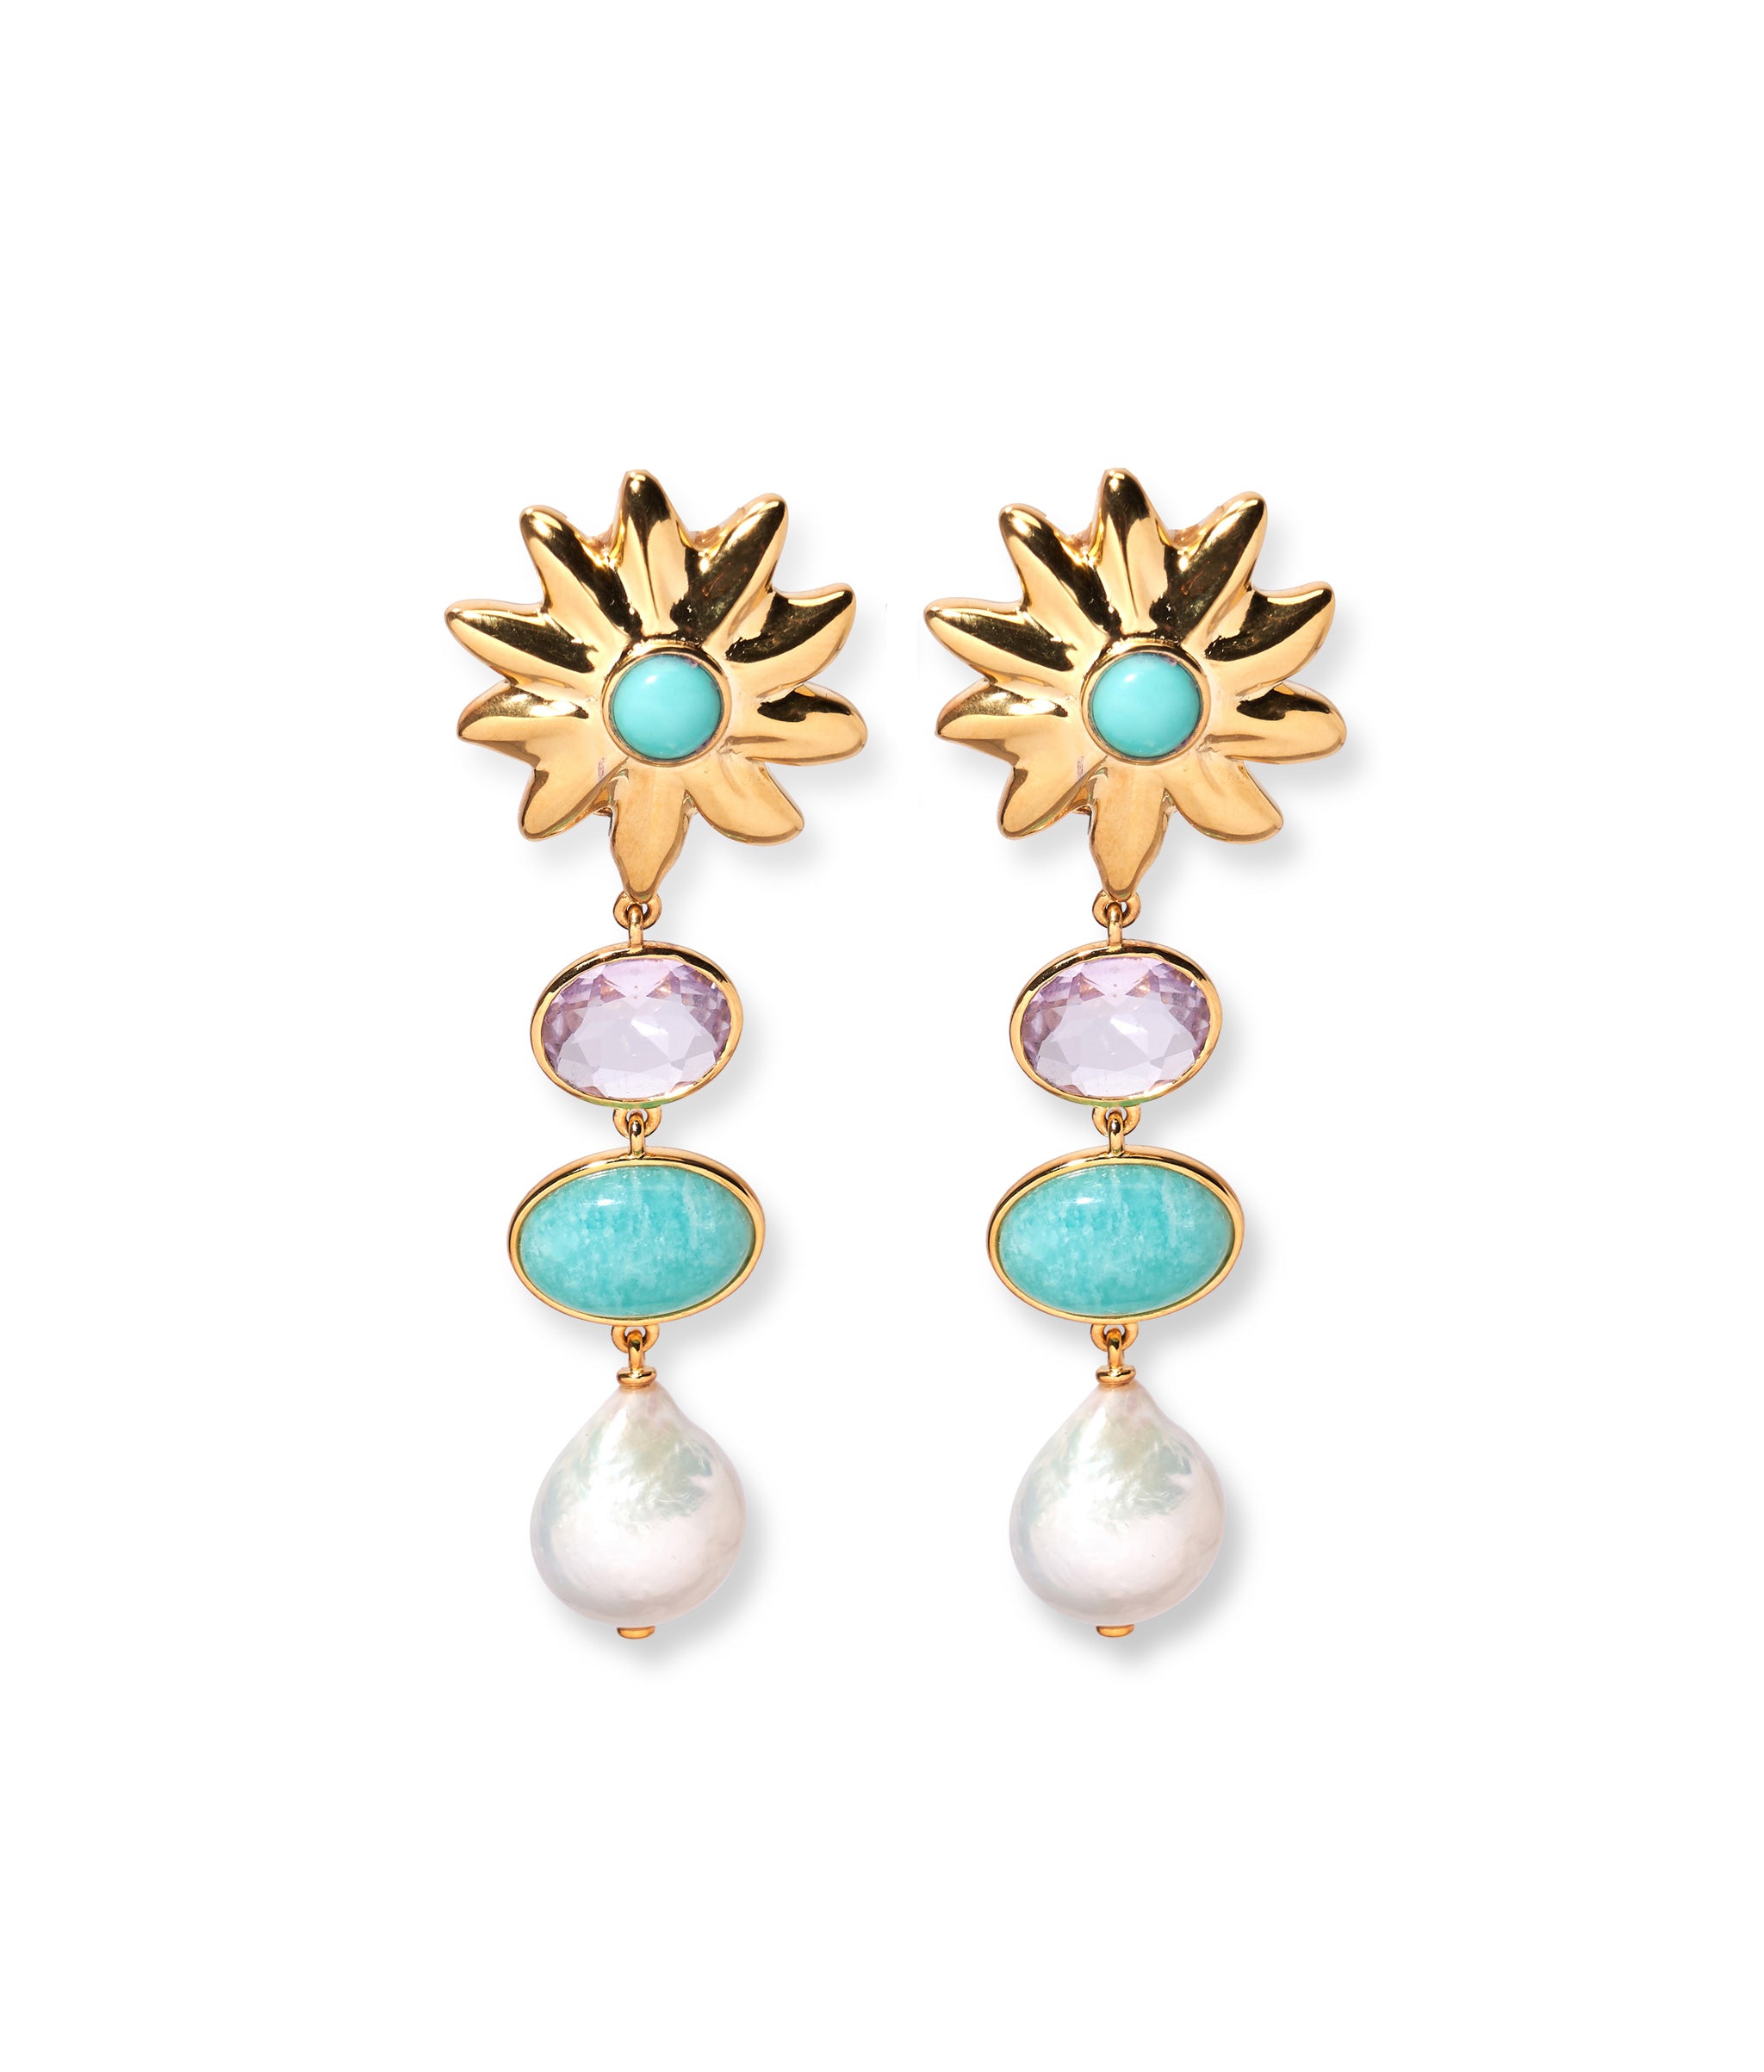 Aphrodite Earrings. With etched gold starburst tops set with turquoise, and pink amethyst, amazonite and pearl drops. 